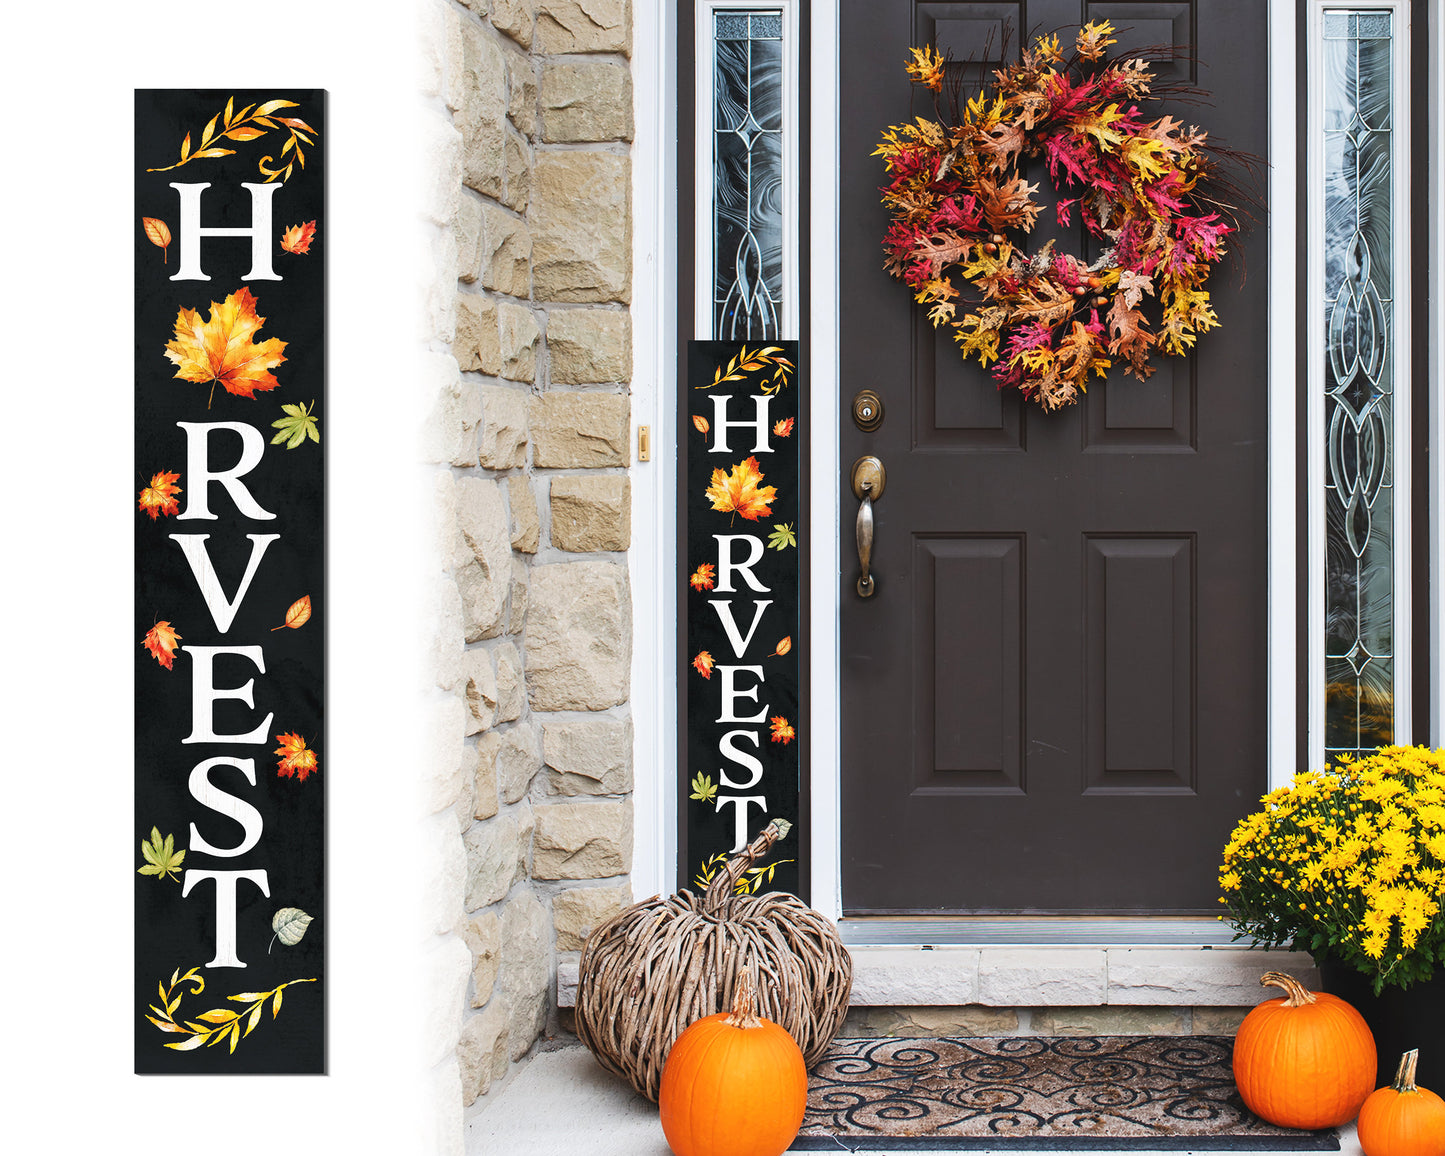 48in "Harvest" Fall Porch Sign - Front Door Decor for Autumn Celebrations